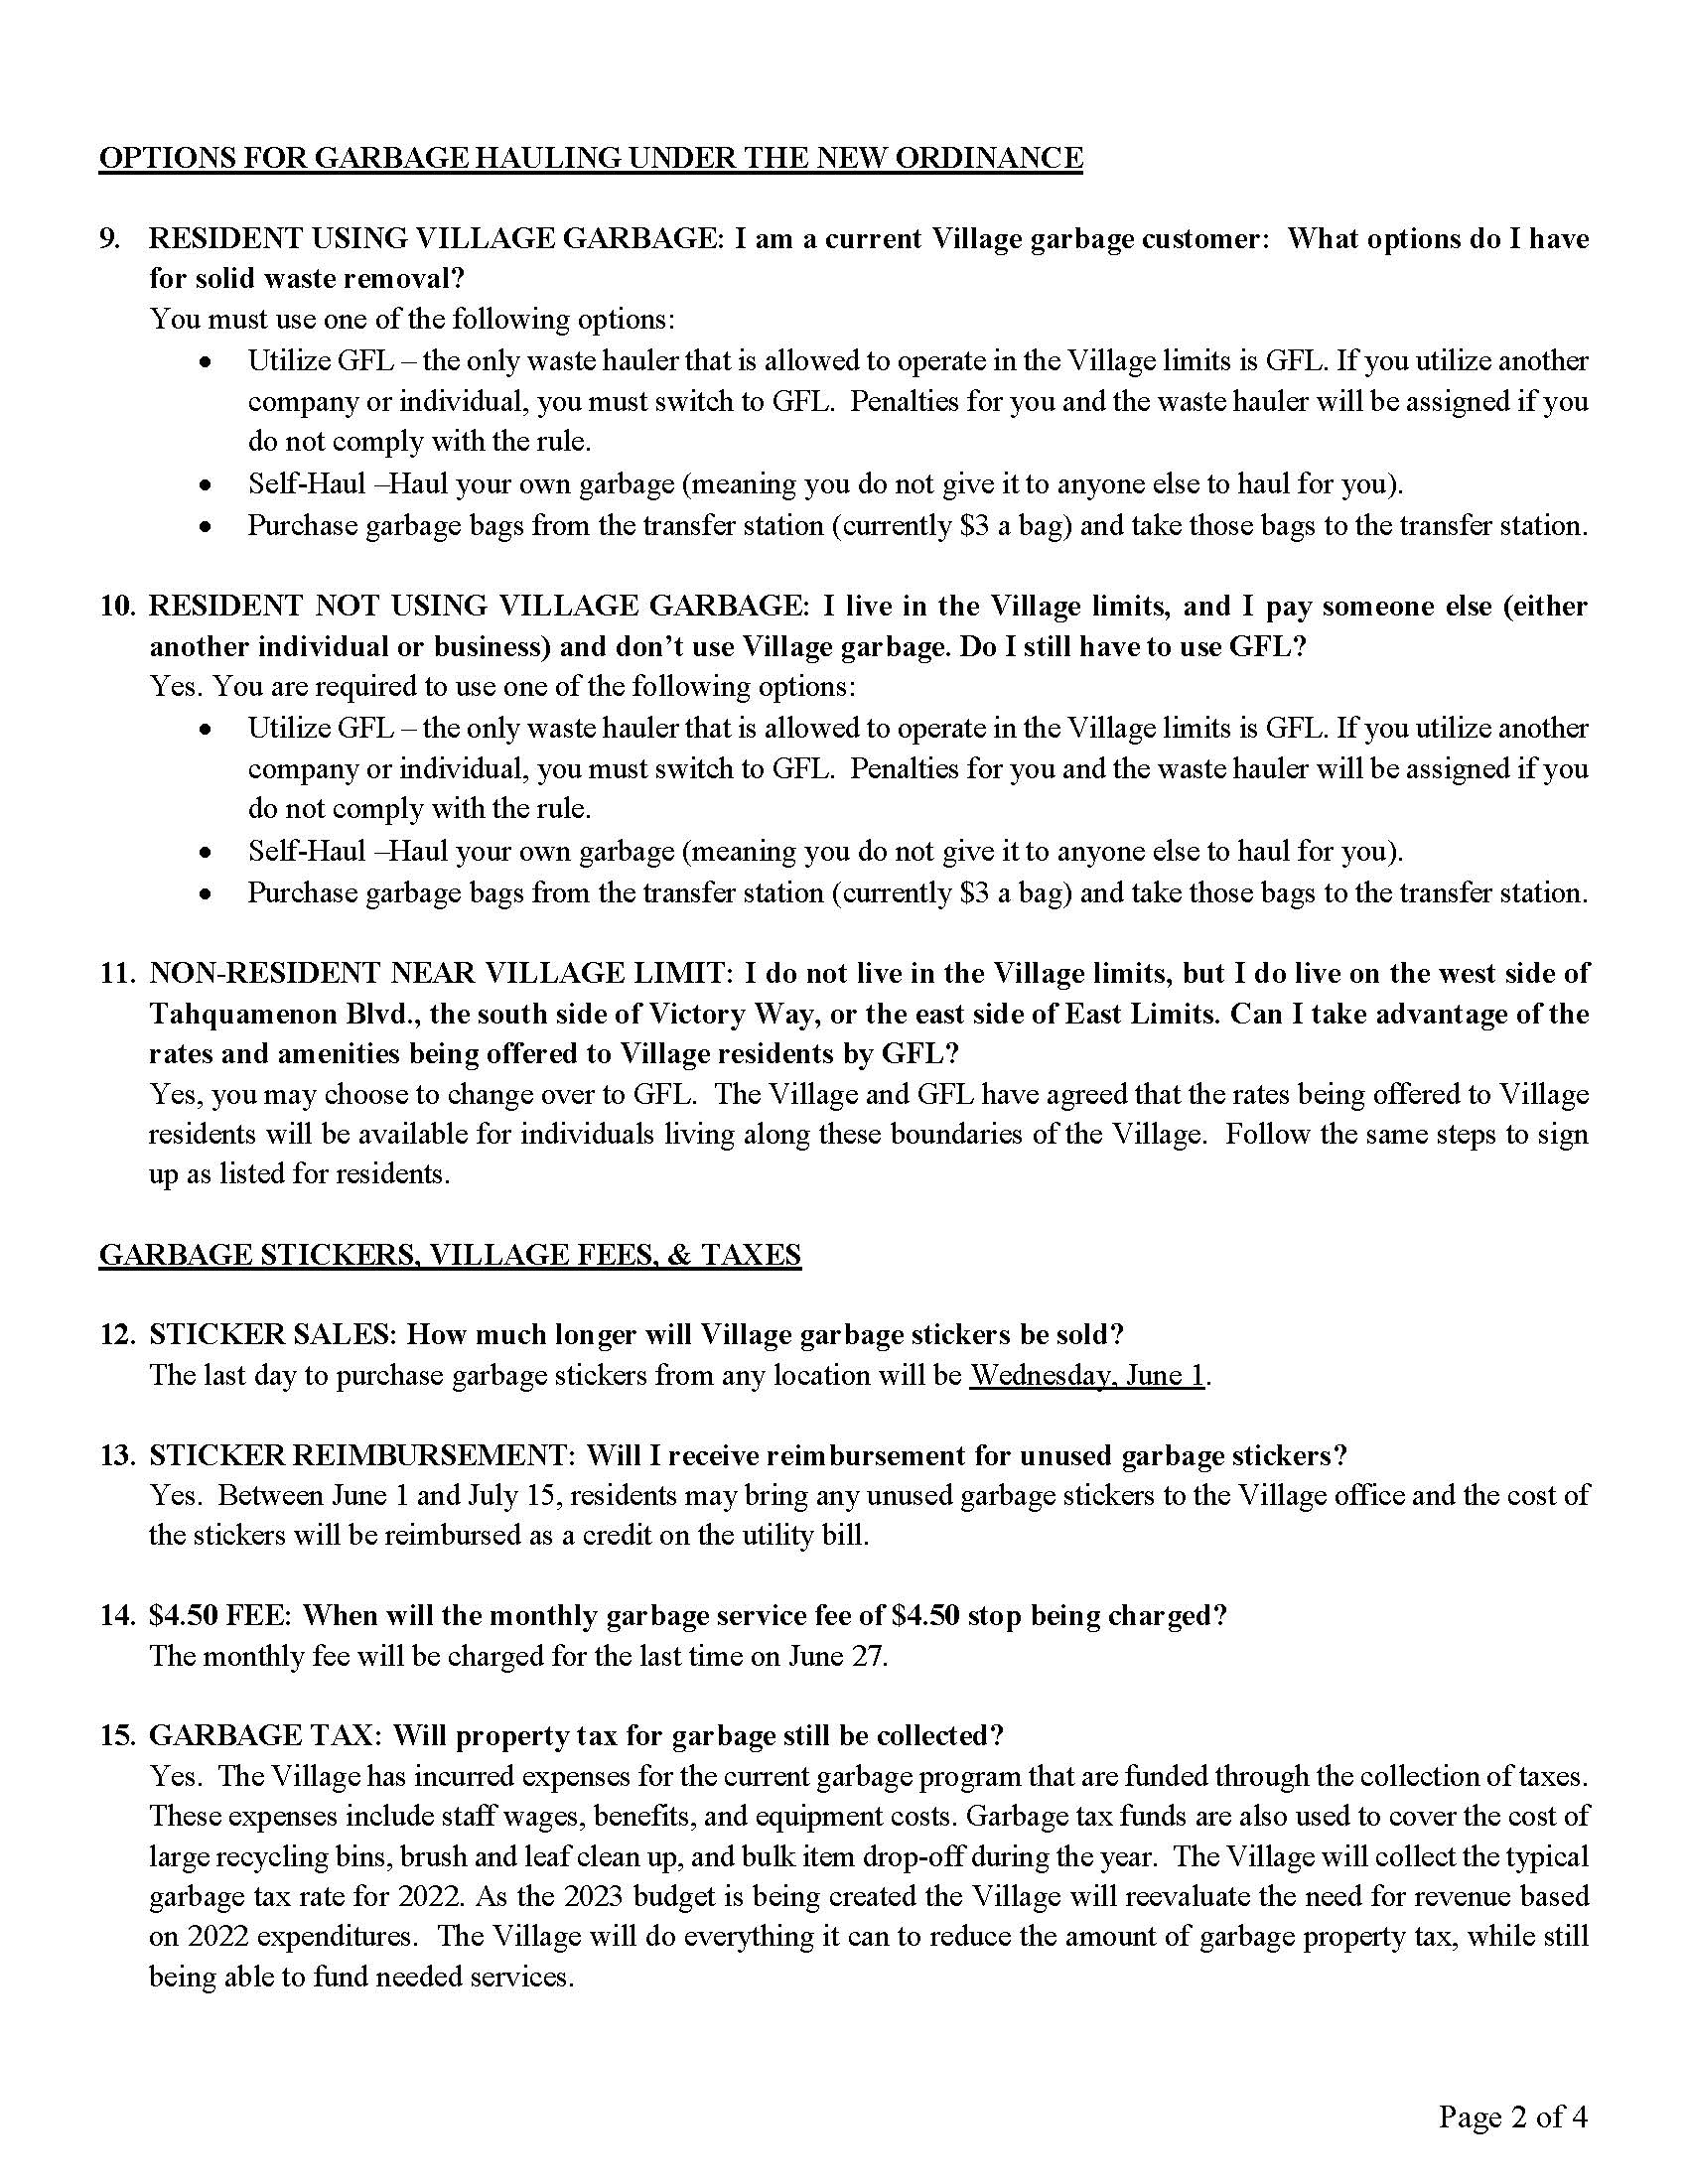 Garbage phase out FAQ list for Village residents as of 3.31.2022 final for mailing_Page_2